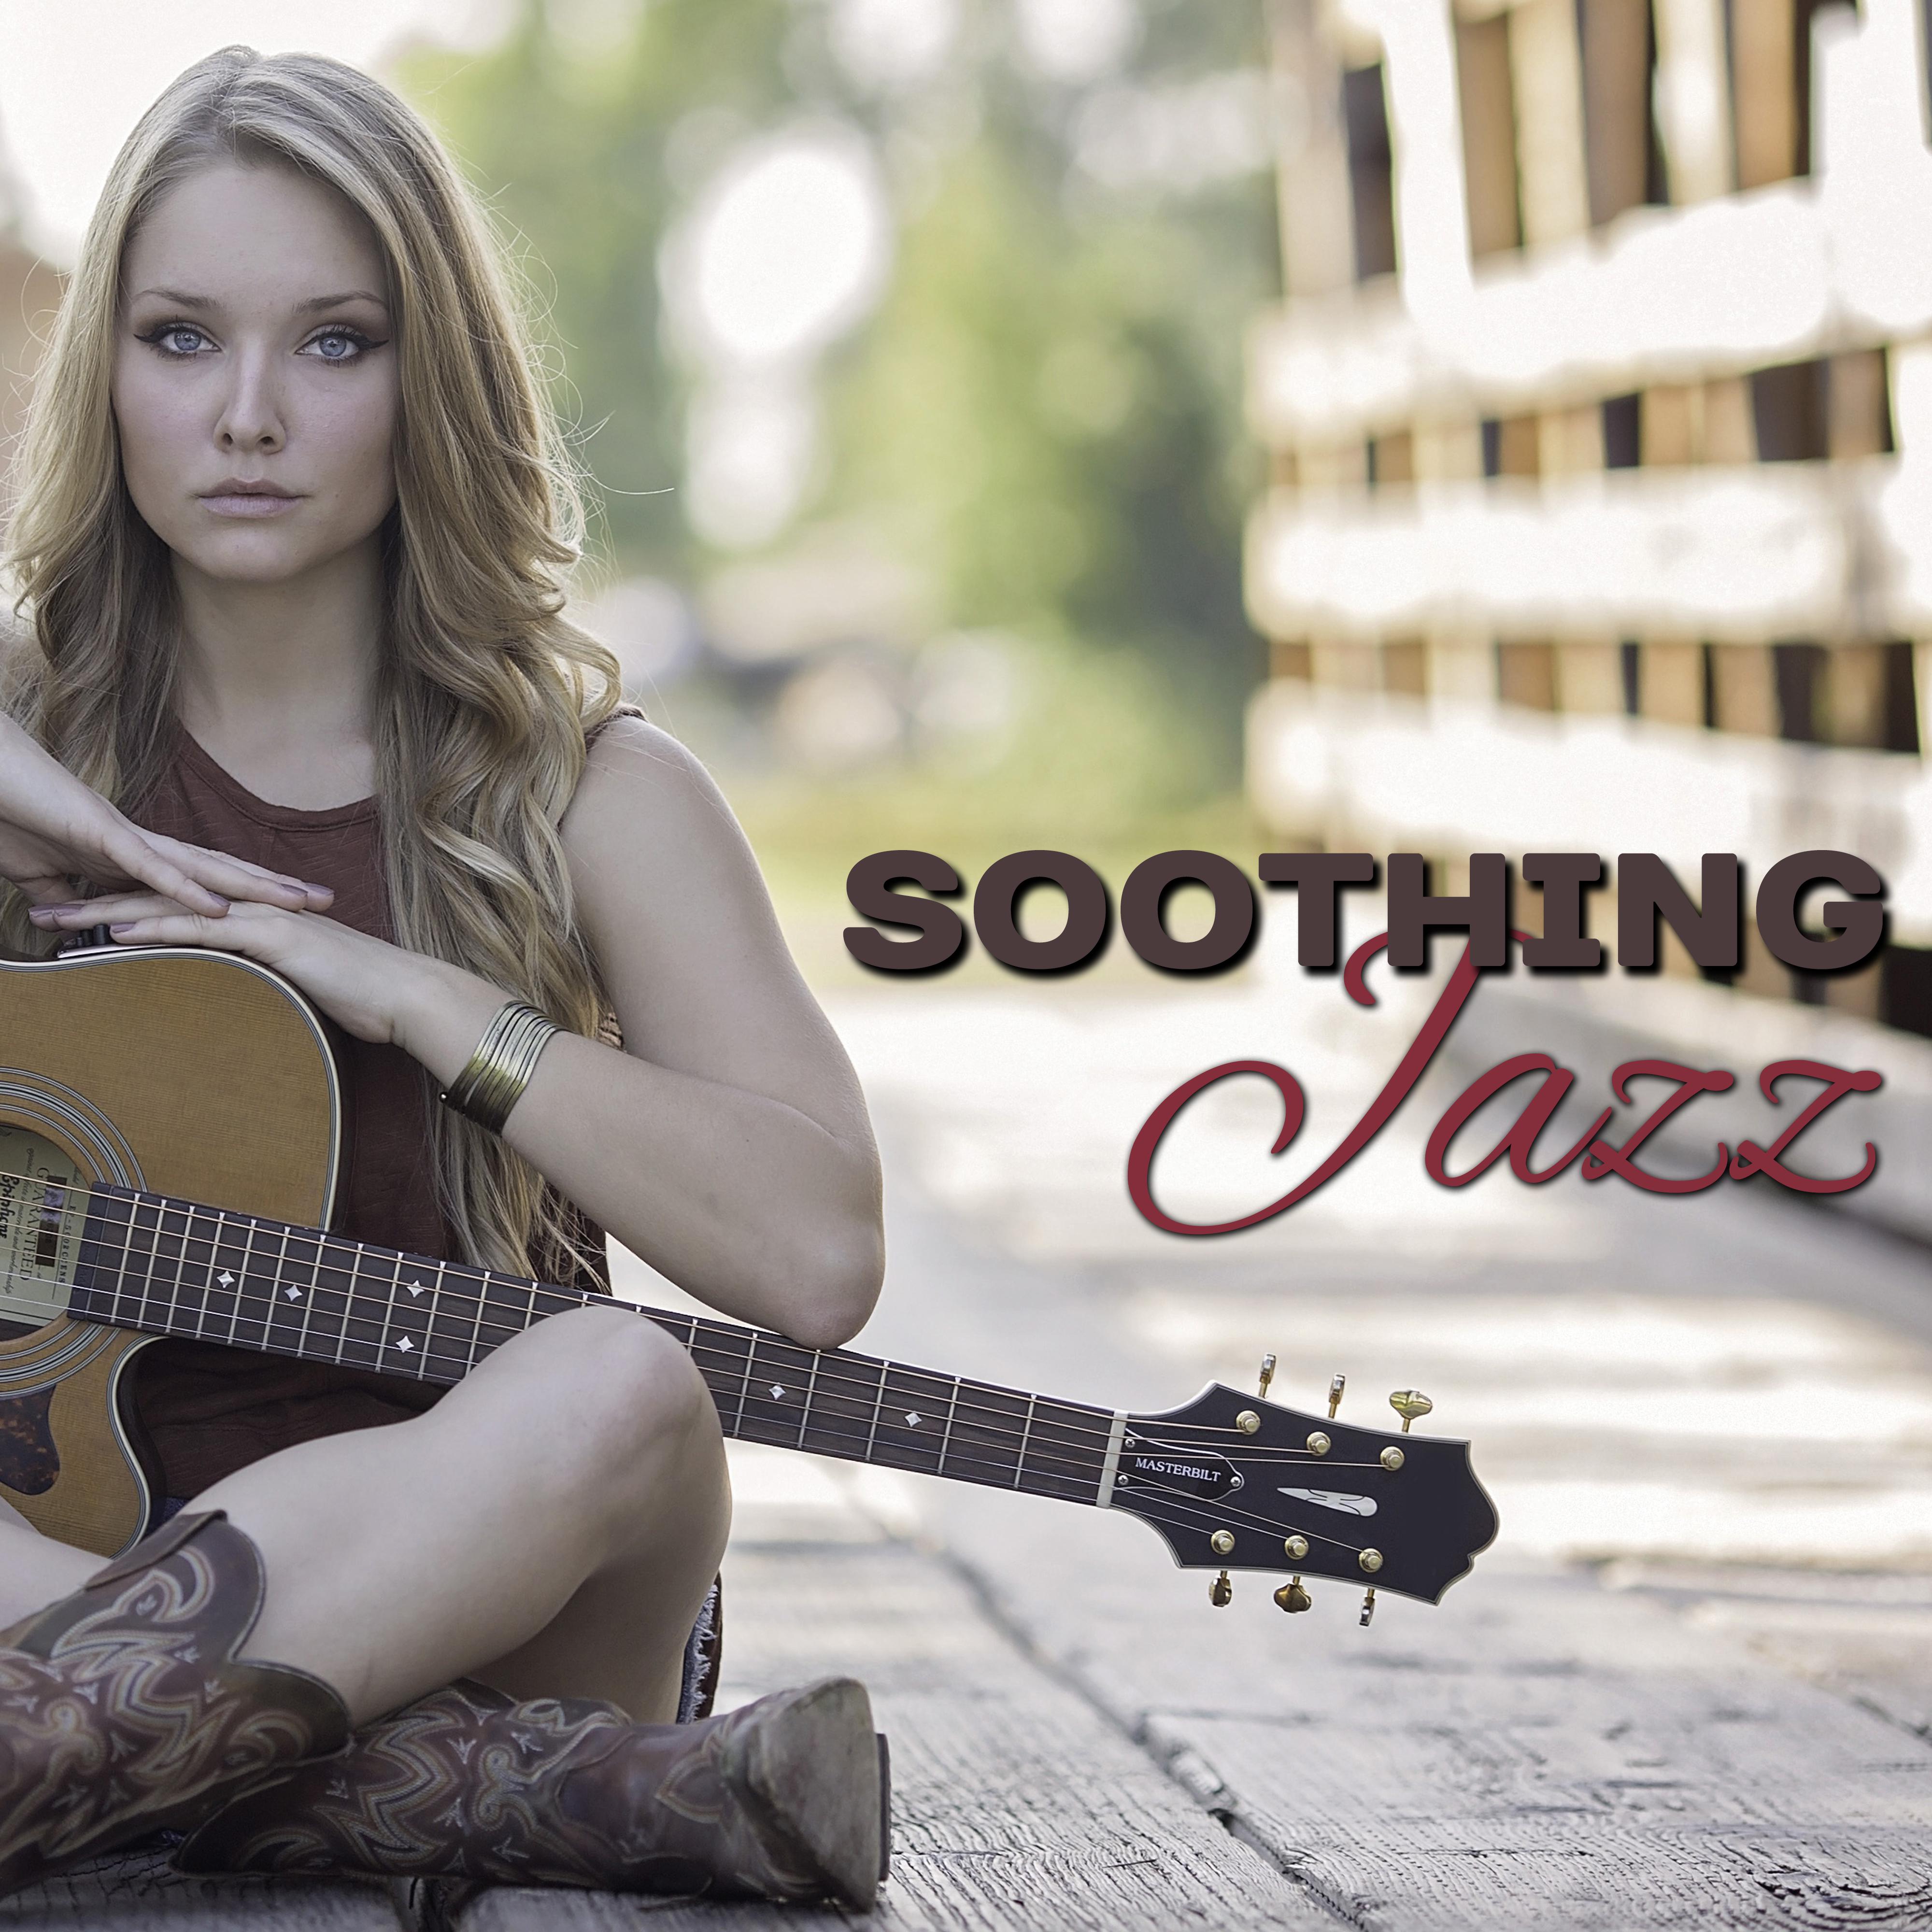 Soothing Jazz – Best Smooth Jazz for Relaxation, Piano Bar, Night Sounds, Chilled Jazz, Instrumental Sounds, Lazy Night